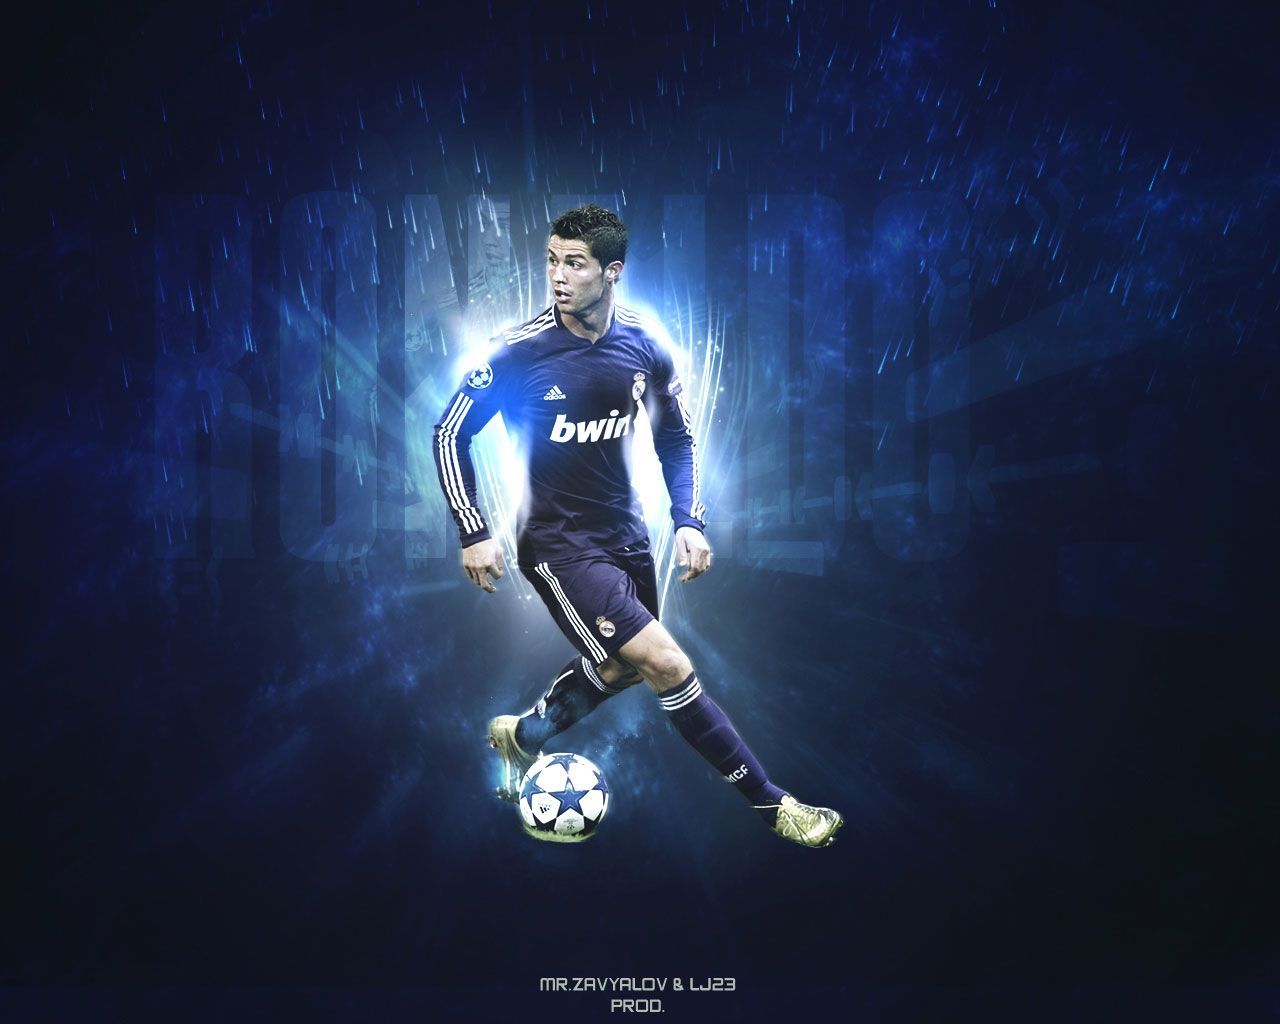 Cristiano ronaldo real madrid wallpaper Wallpapers, Backgrounds